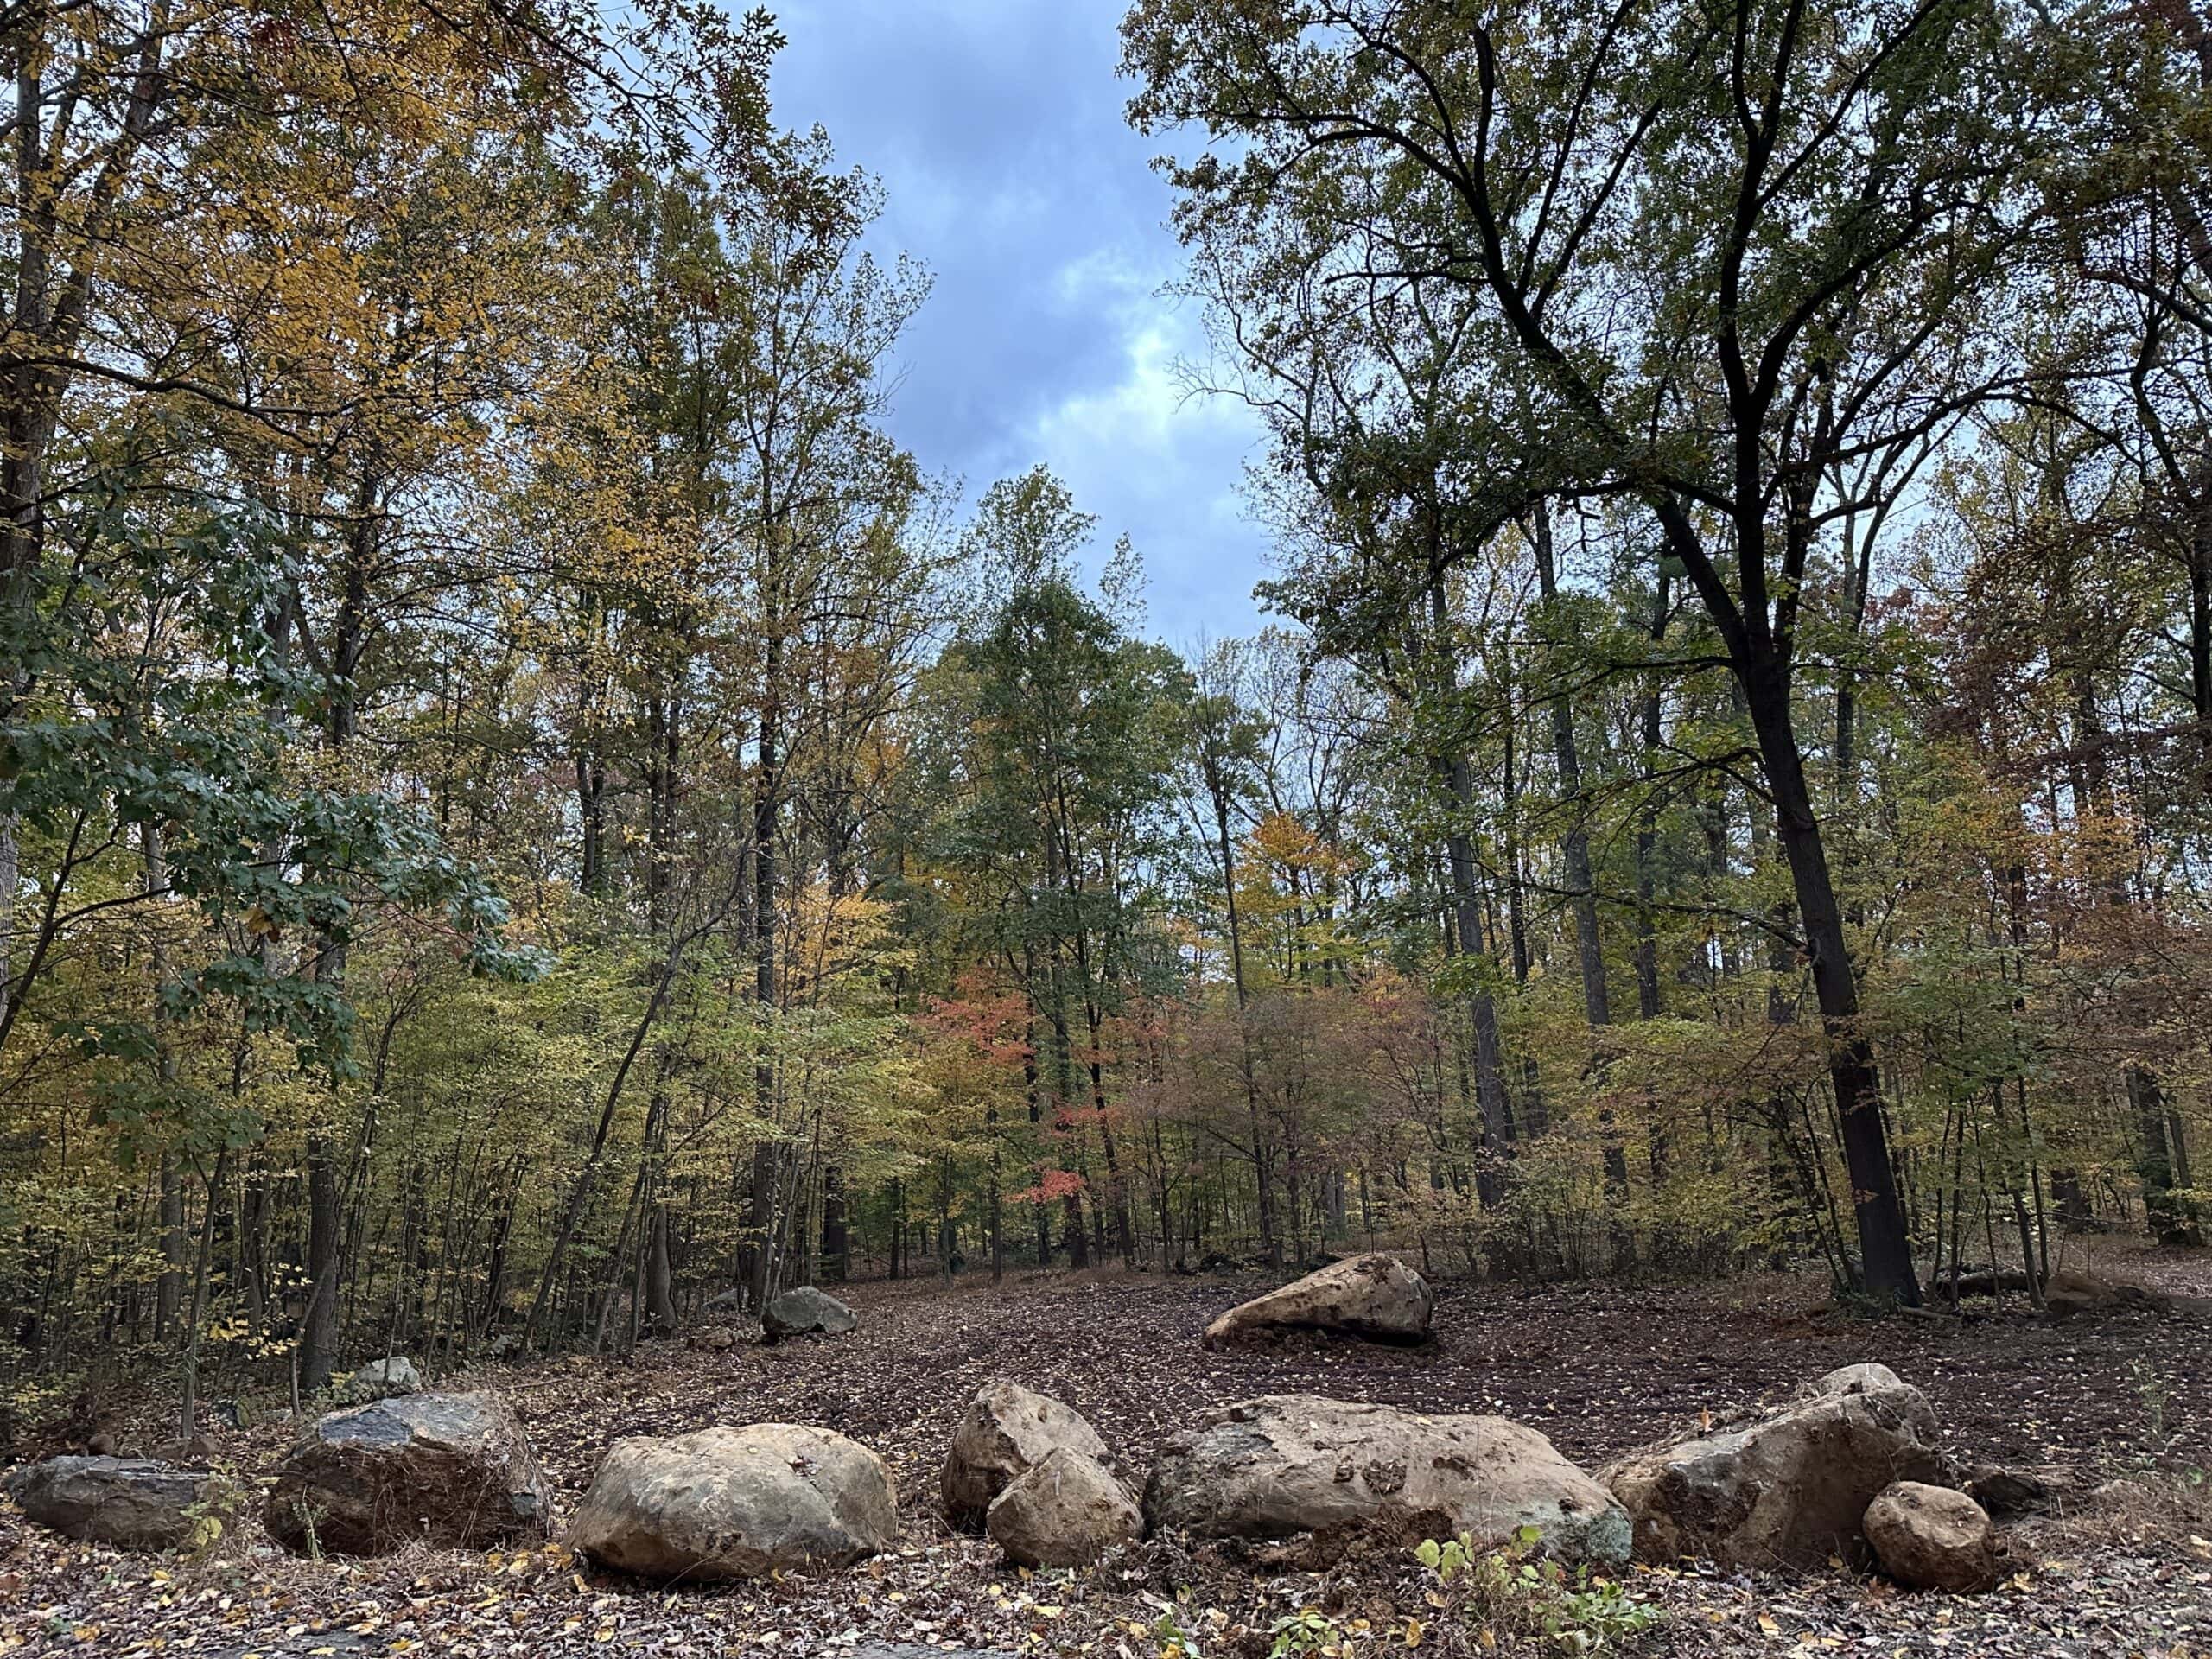 A row of boulders in front of a clearing in the woods.